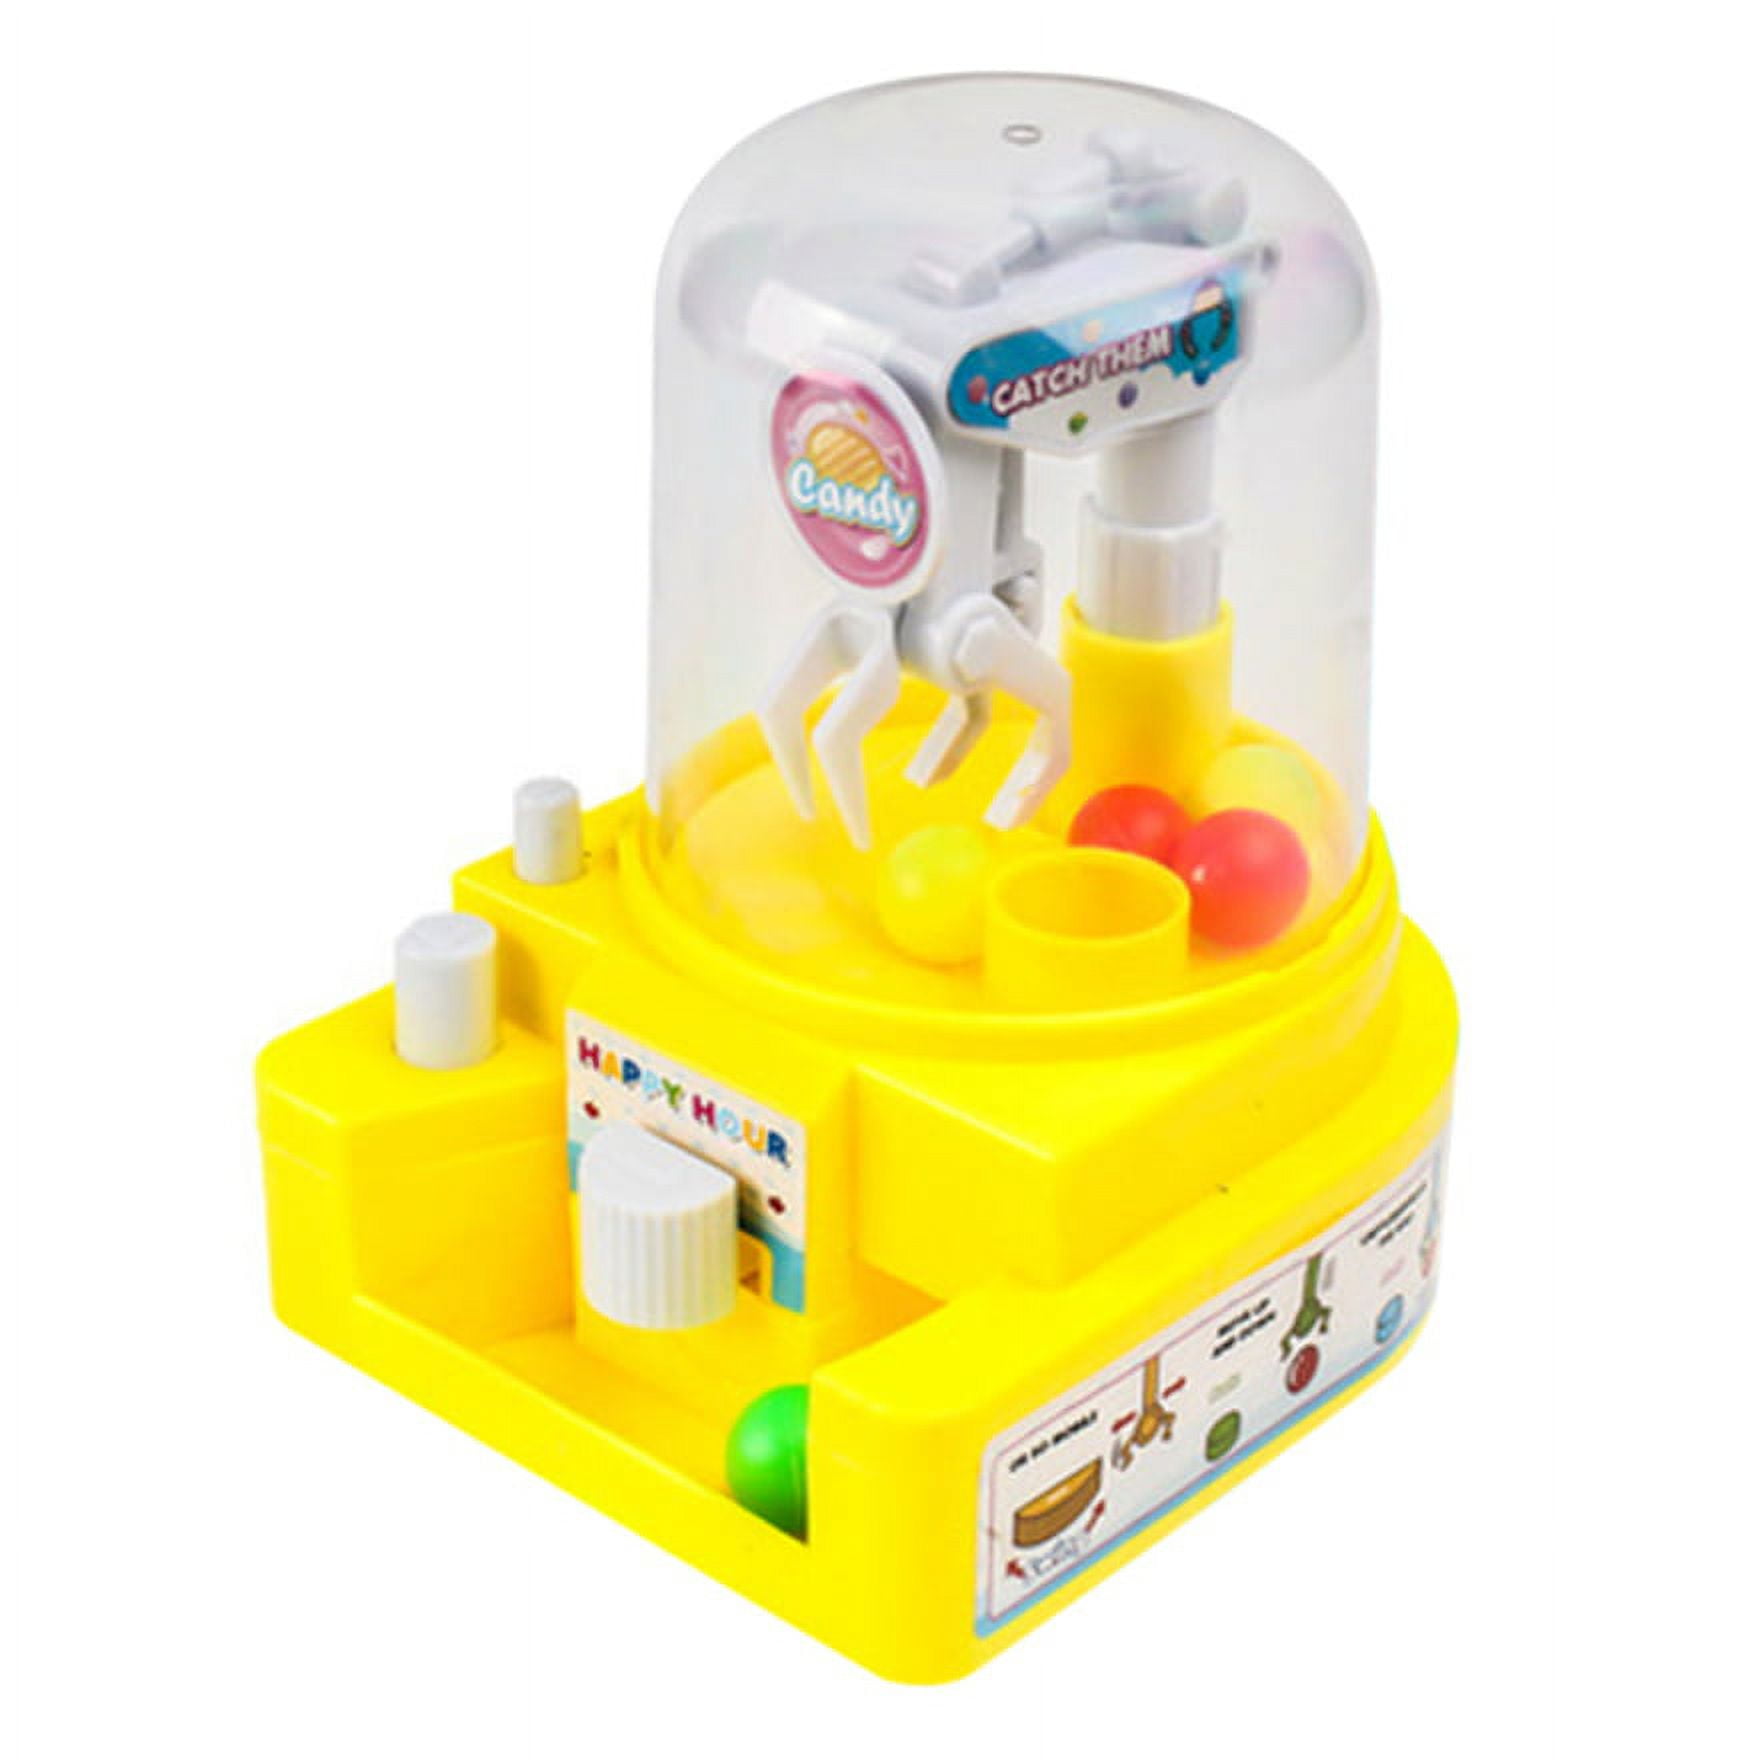 KOVOT Mini Arcade Claw Grabber Machine - Candy Machine for Kids- Retro  Carnival Music - Best Birthday Gift Game. Use Gumballs, Toys, or Small  Prizes